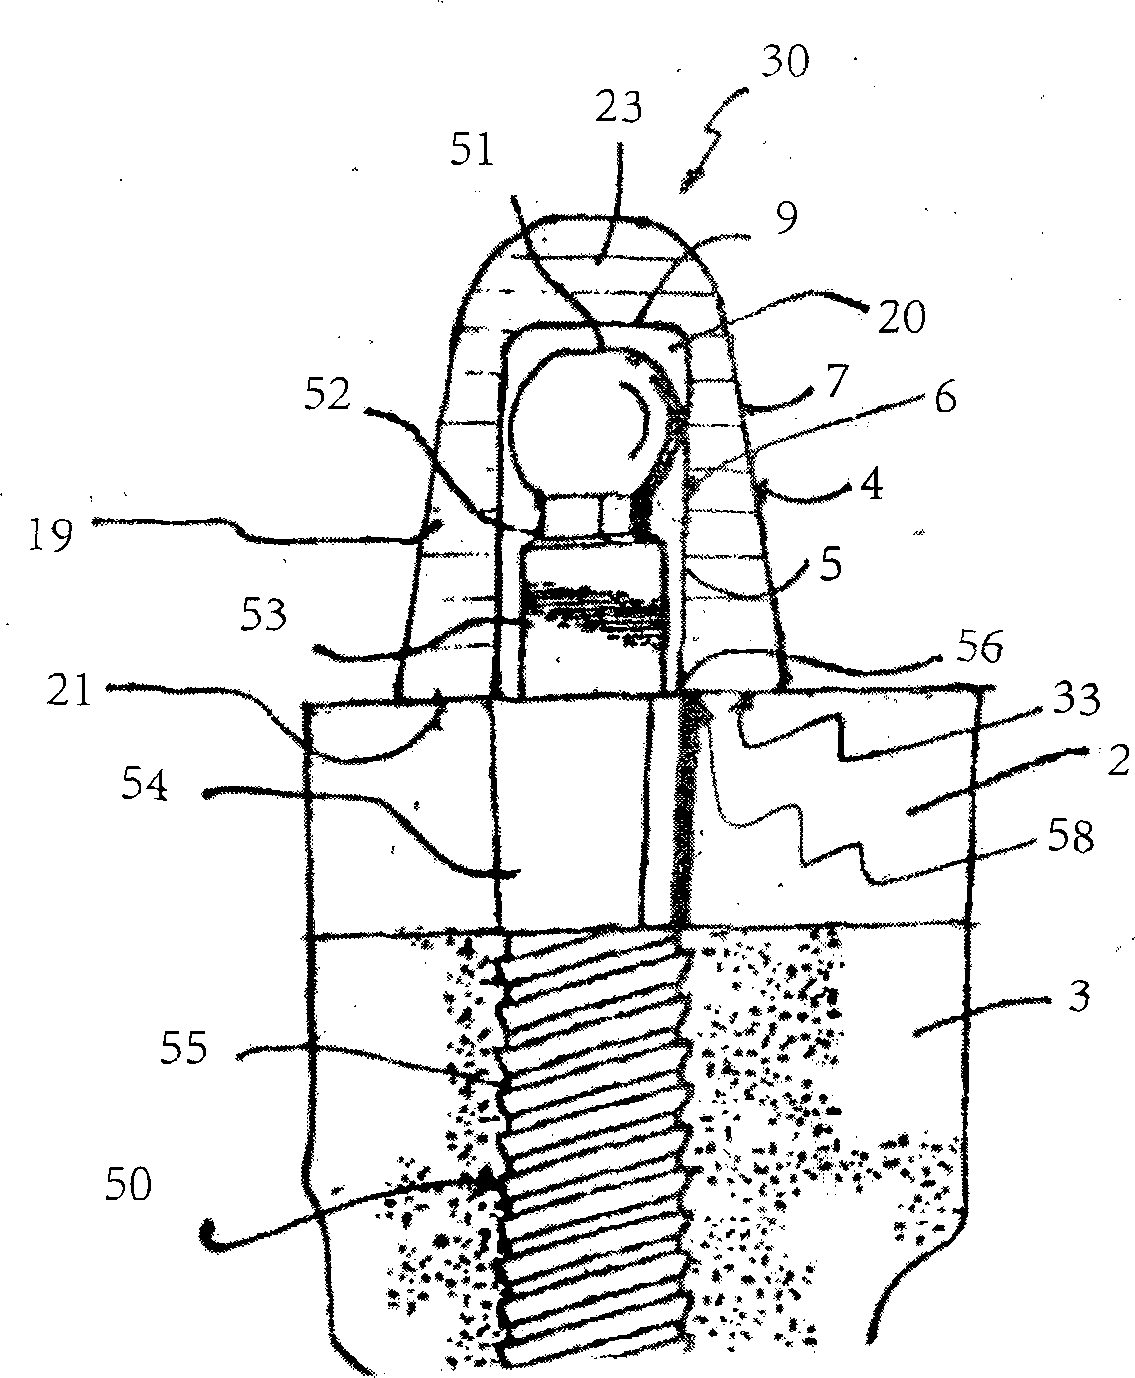 Prosthesis mounting device and carrier tool for use in mini implant fixed/removable prosthodontic applications